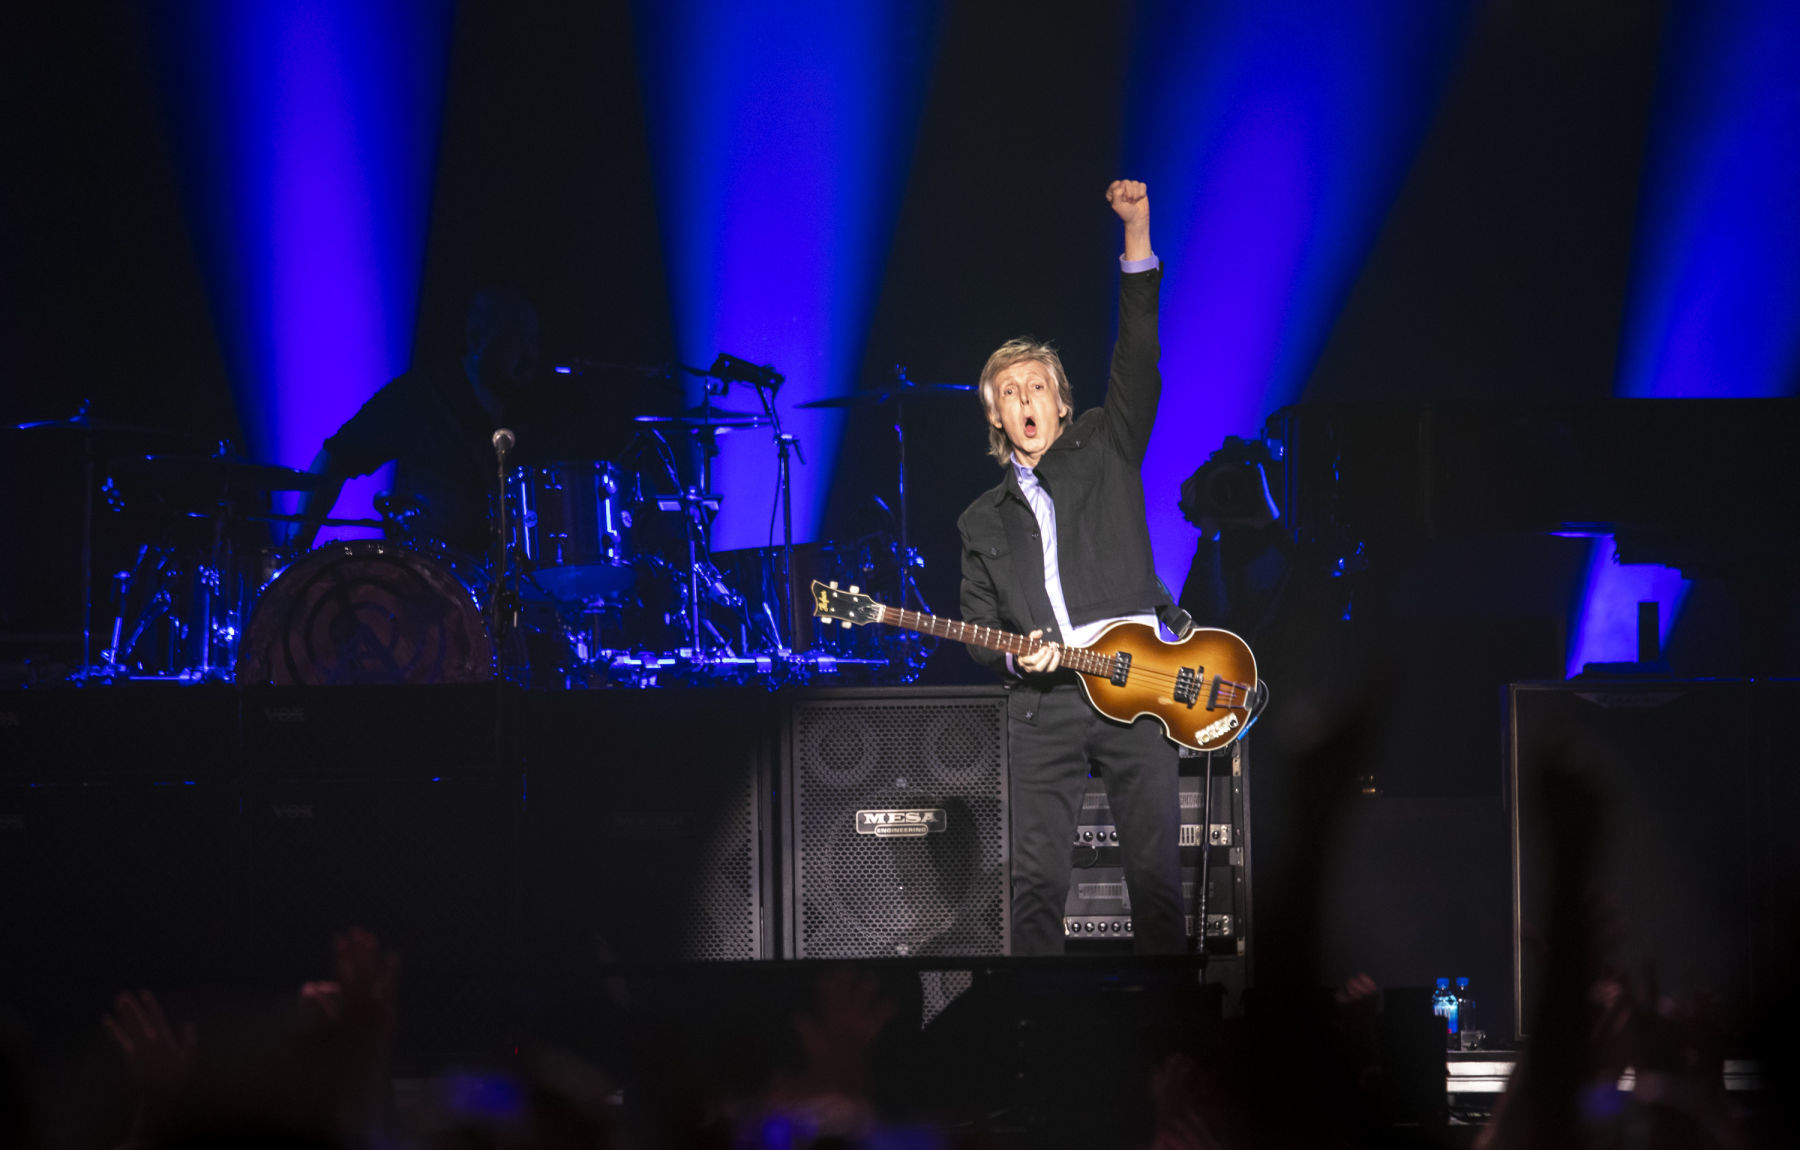 In Moline, McCartney offered a diverse, dazzlingly spectacular show